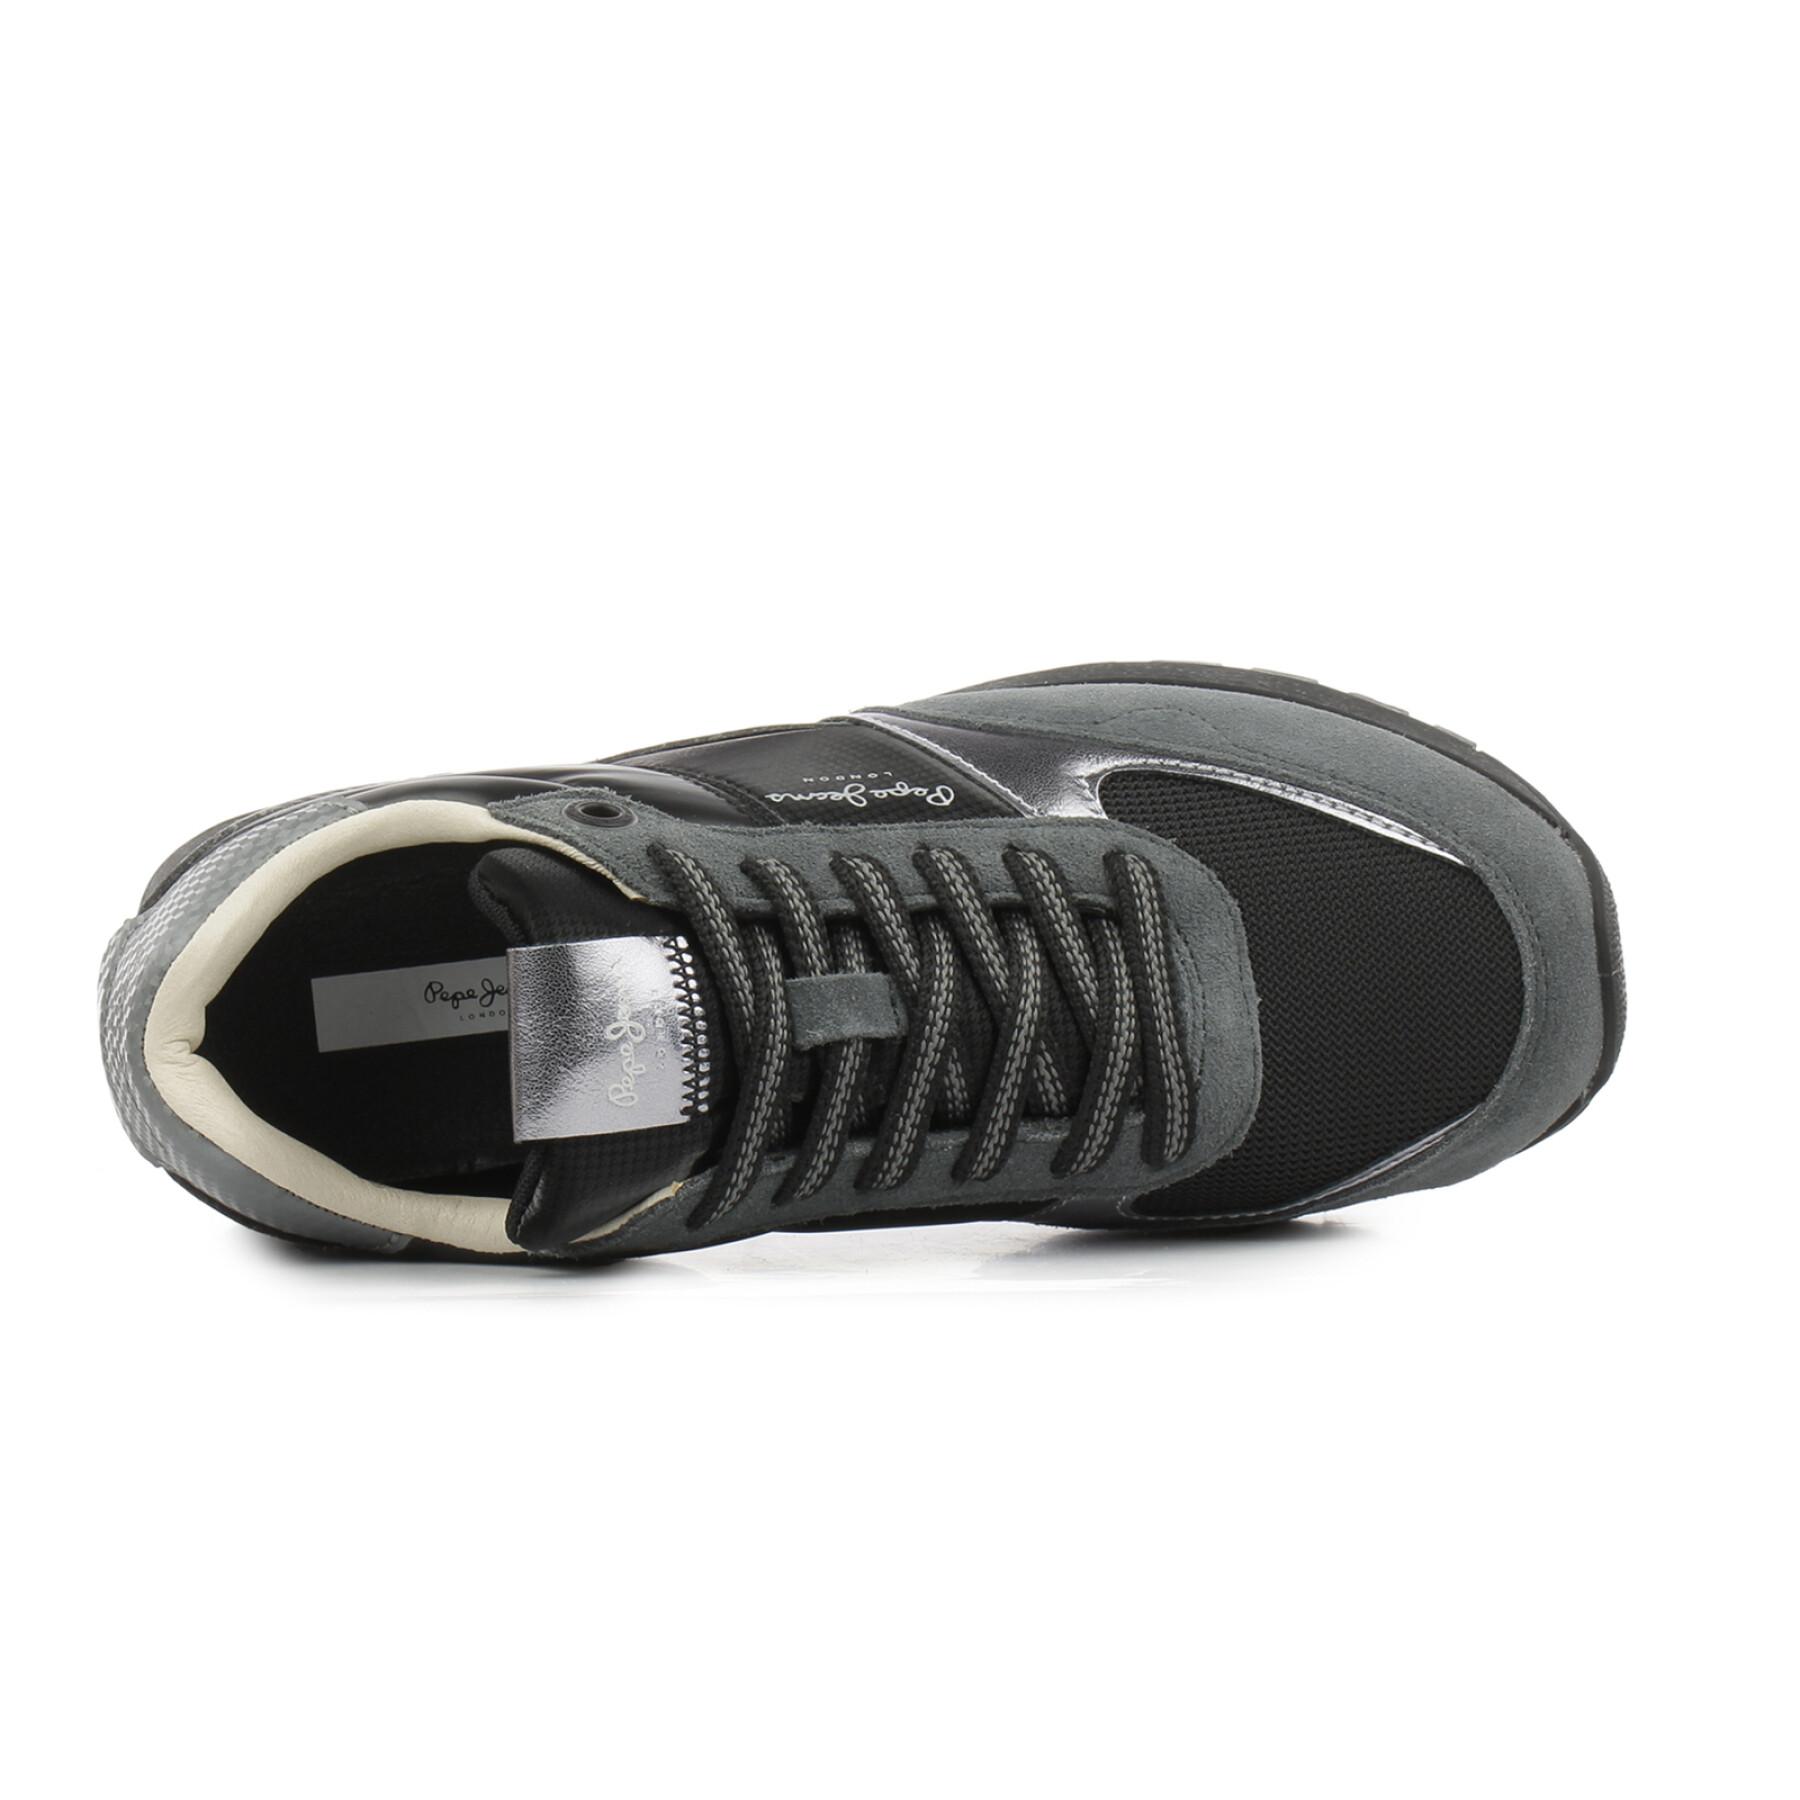 Women's sneakers Pepe Jeans Dean Square